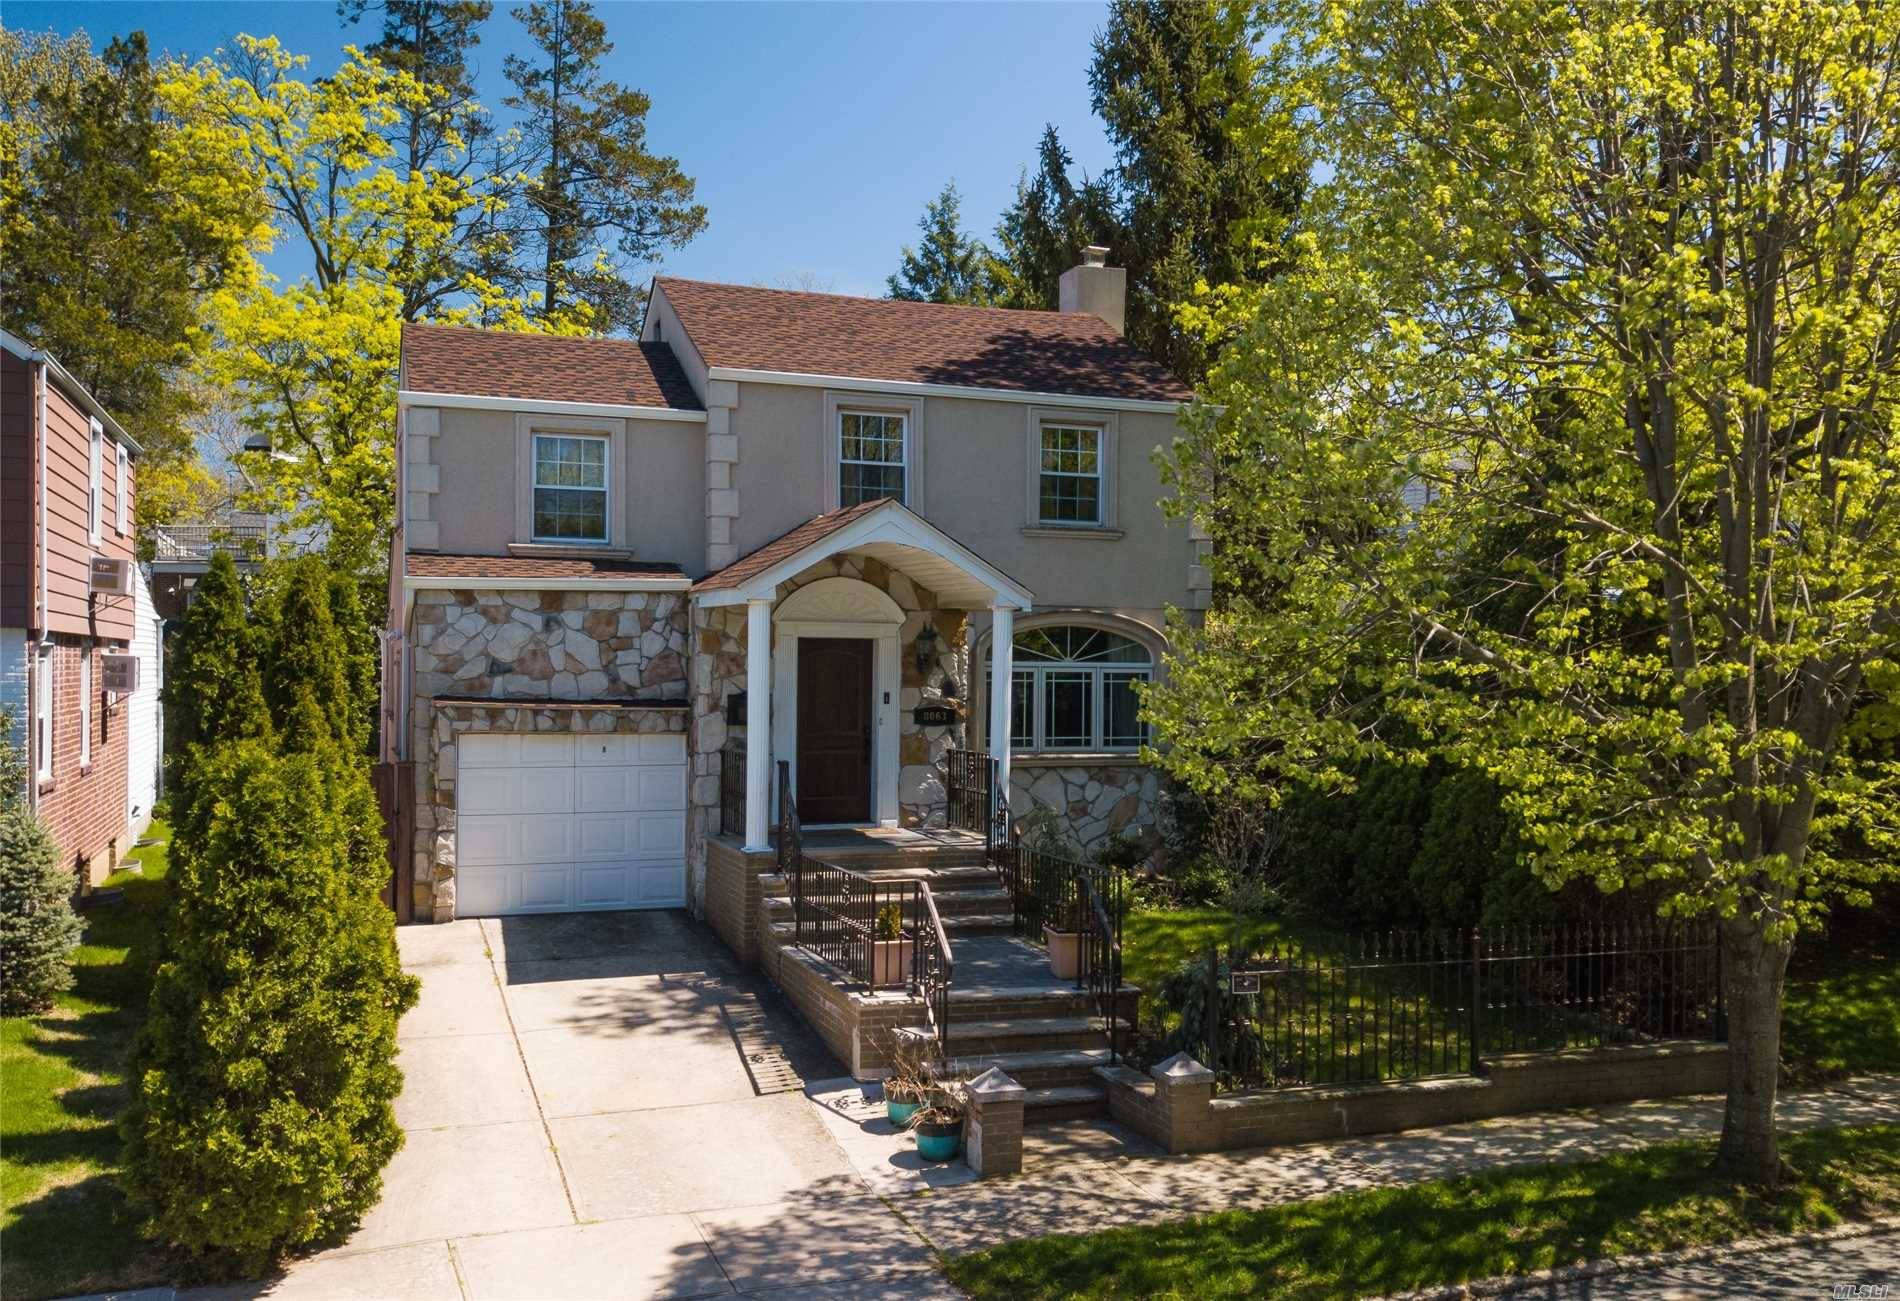 Move right into this fully updated stucco stone colonial !